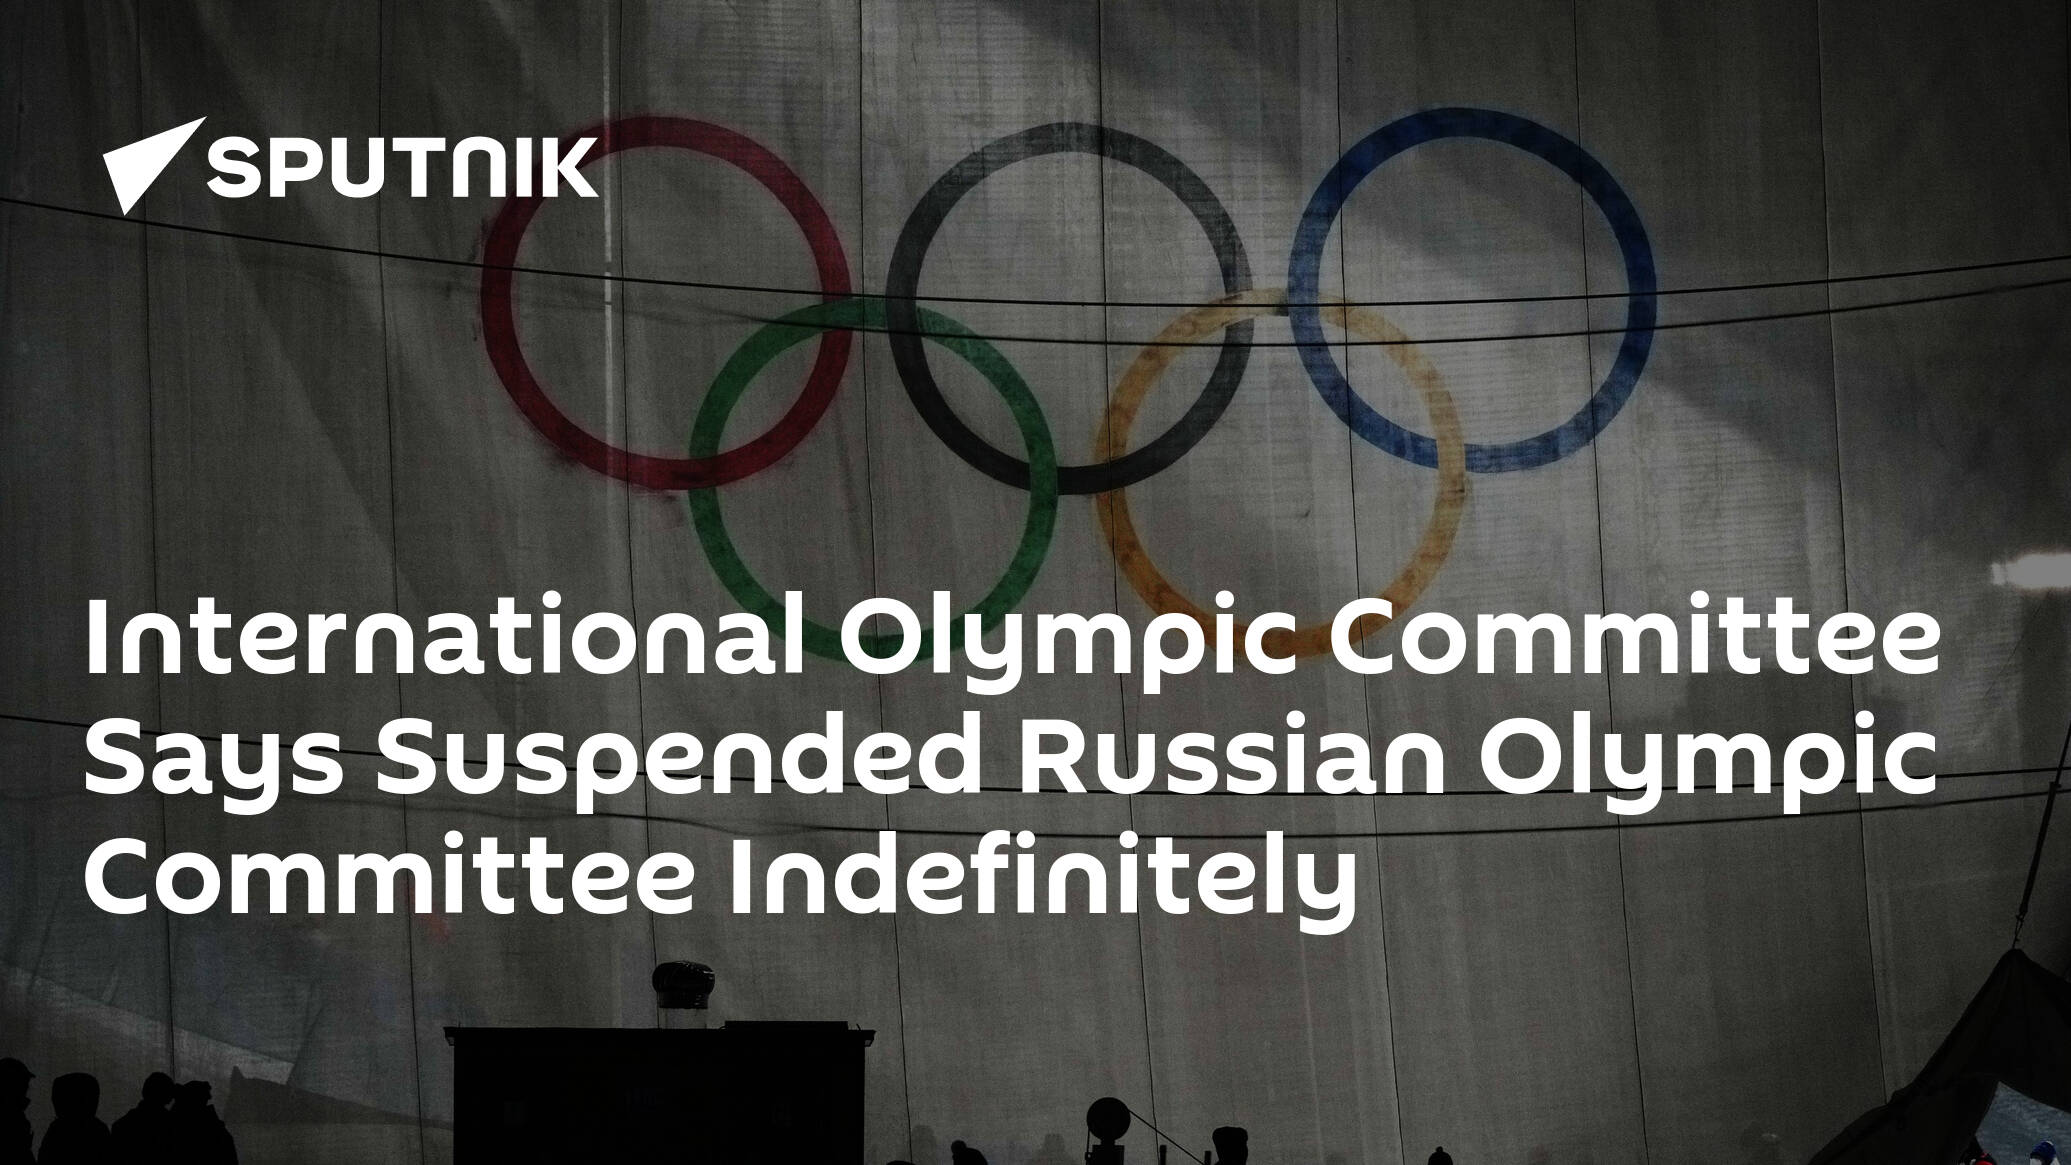 International Olympic Committee Says Suspended Russian Olympic Committee Indefinitely